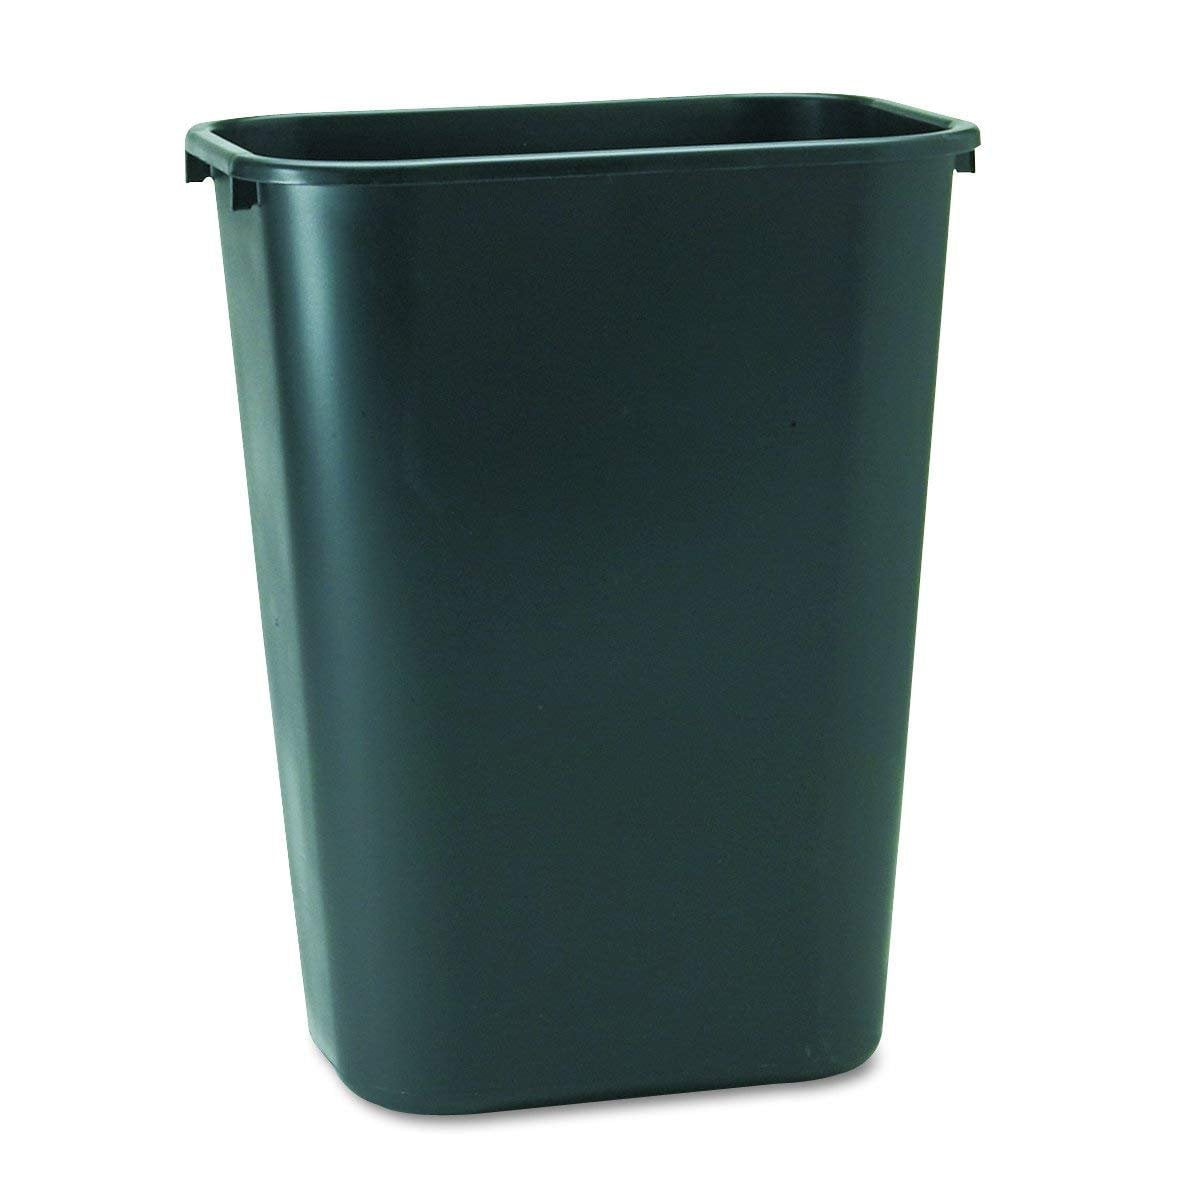 Commercial trash can Rubbermaid Ranger 36 to 45 gallon plastic, beige  RCP917188BG